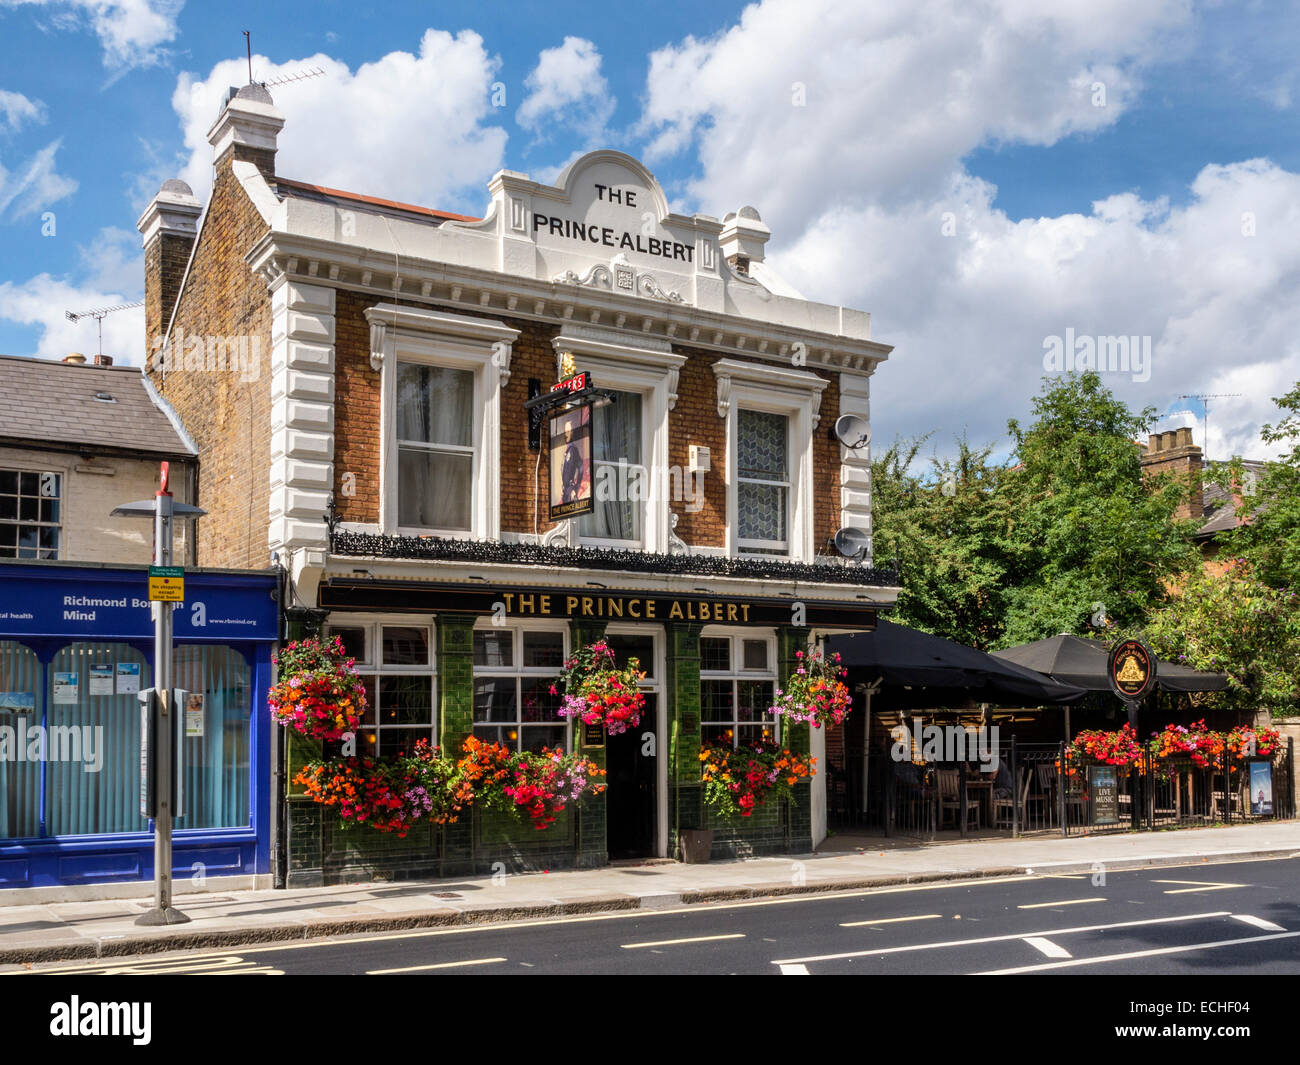 The Prince Albert - exterior of a typical traditional English pub with flower baskets in Summer, Twickenham, Greater London, UK Stock Photo